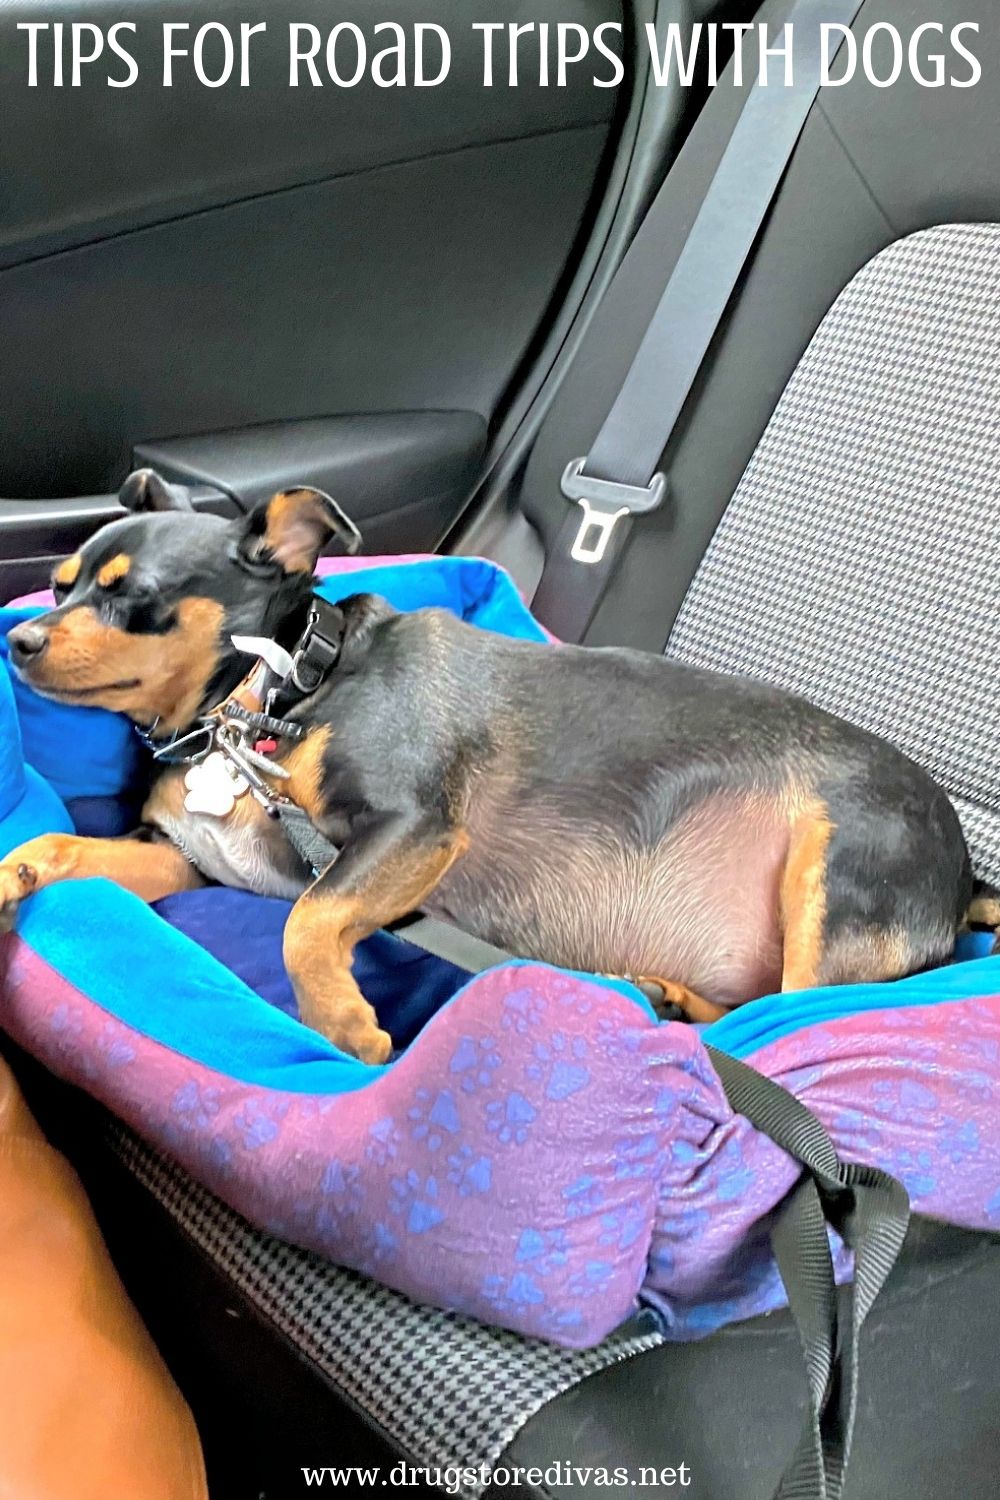 Planning a road trip with your furbaby? Before you go, check out these tips for road trips with dogs on www.drugstoredivas.net.